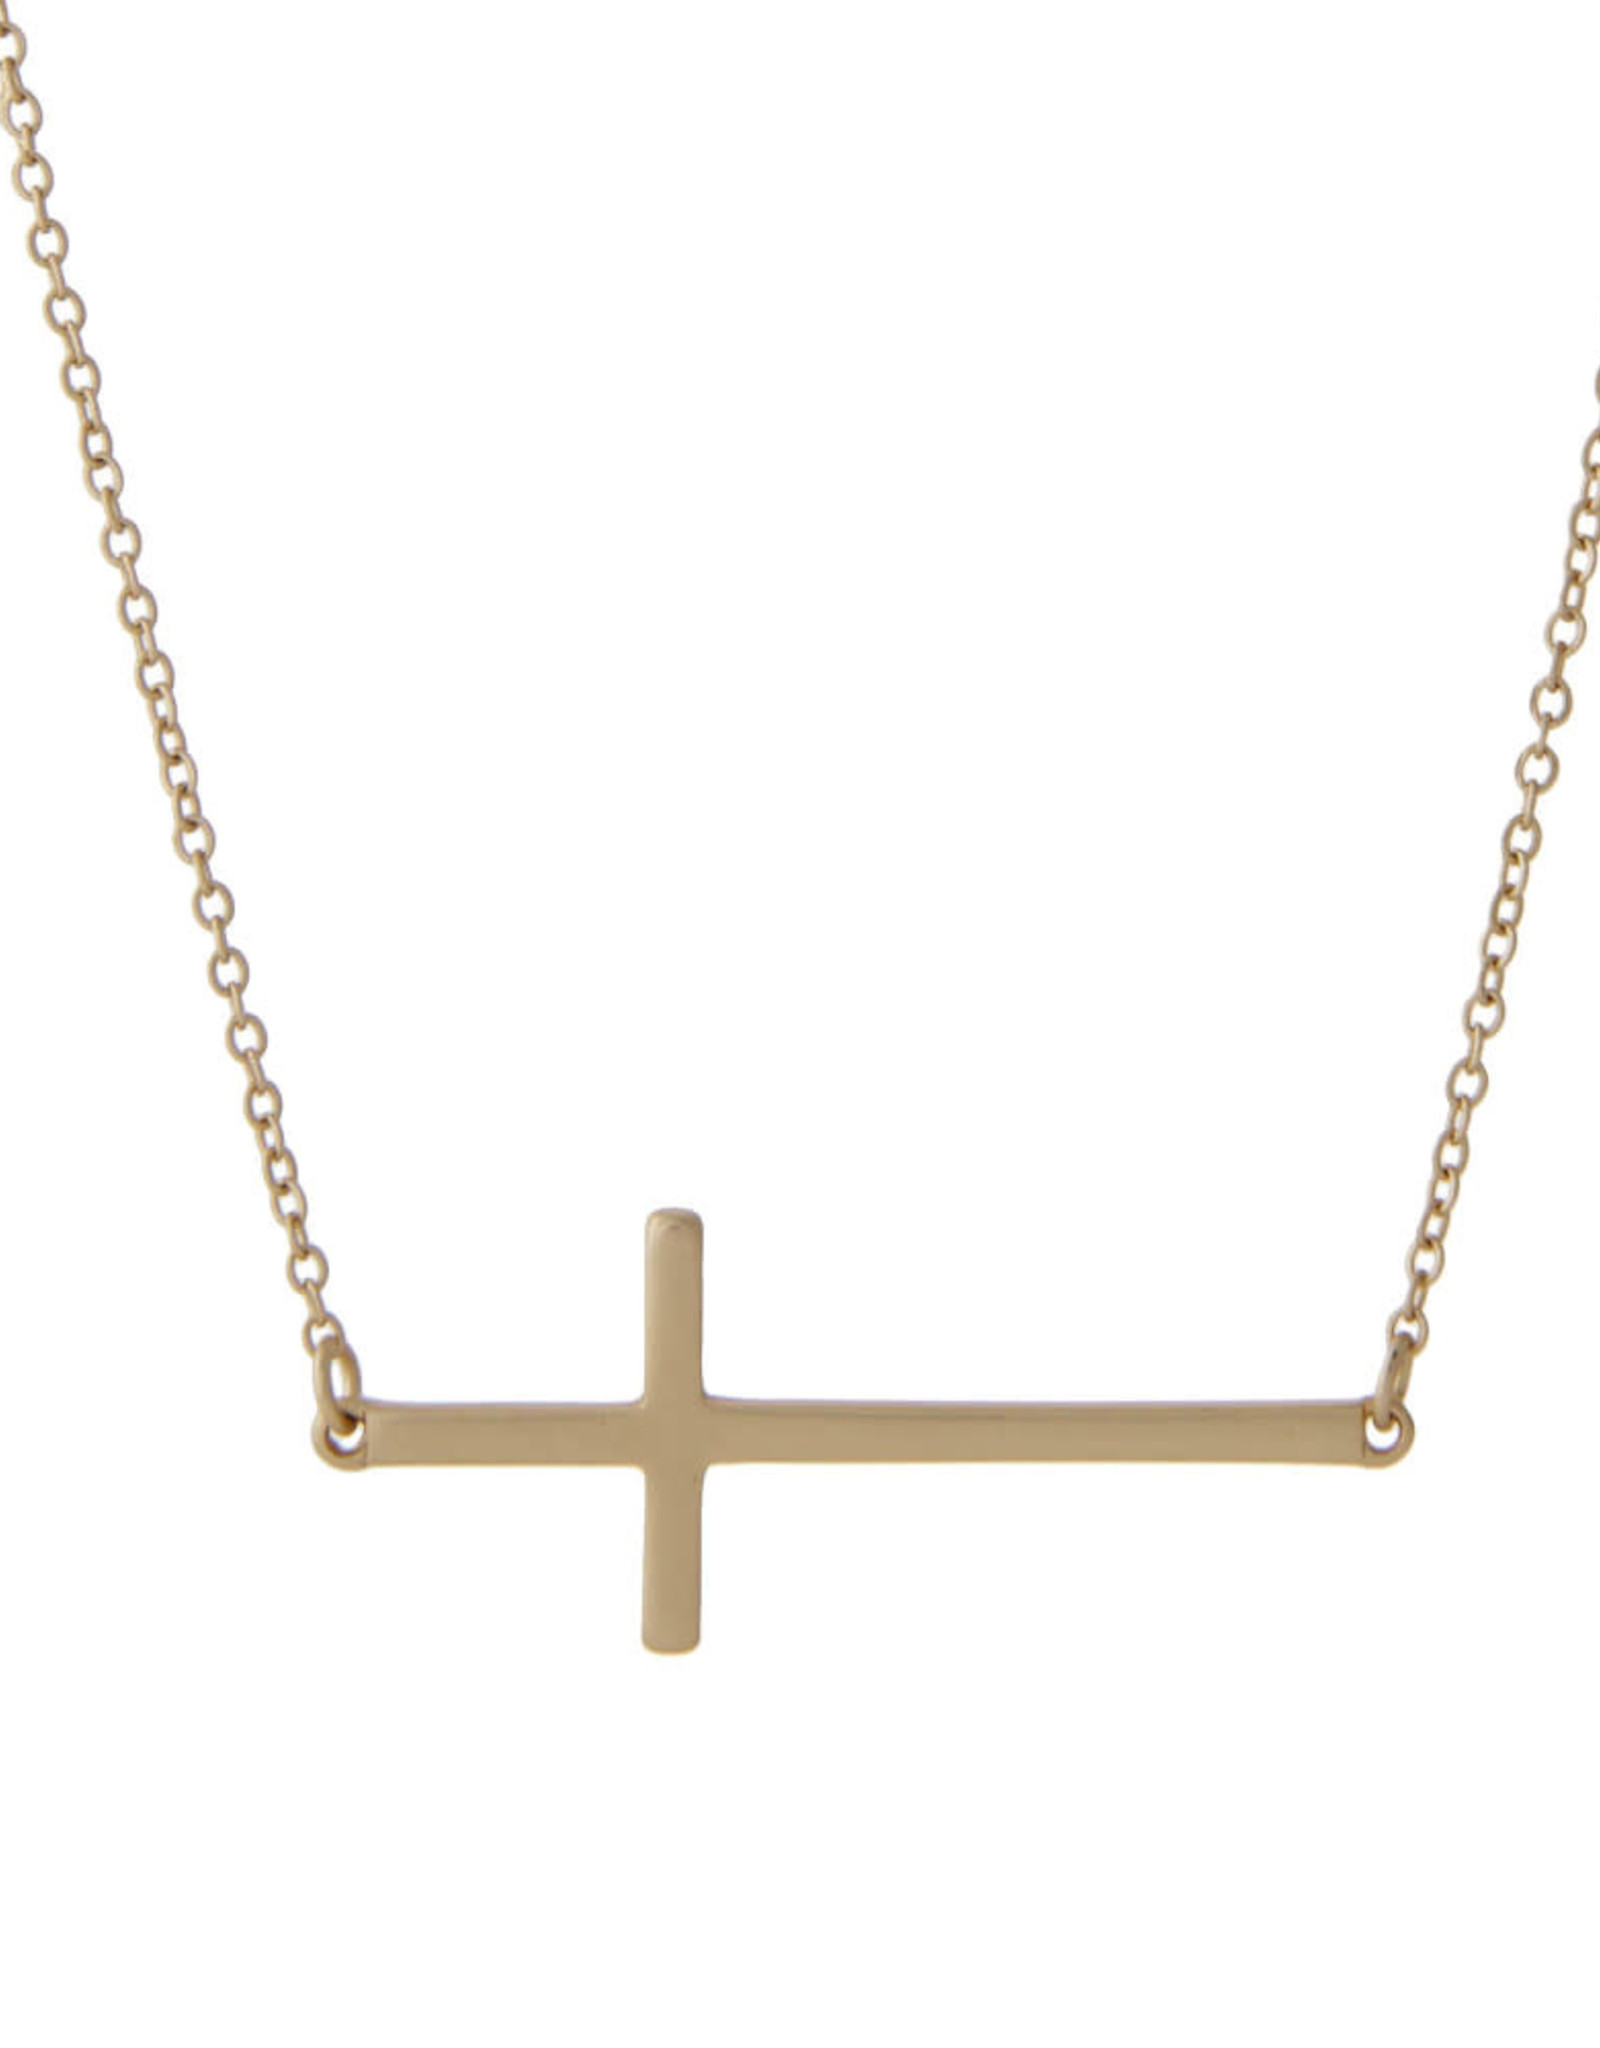 judson 102739 - East West Cross Necklace in a Matte Finish  - Pendant 1.5"  - Approximately 16" Long - 2" Adjustable Extender - Gold